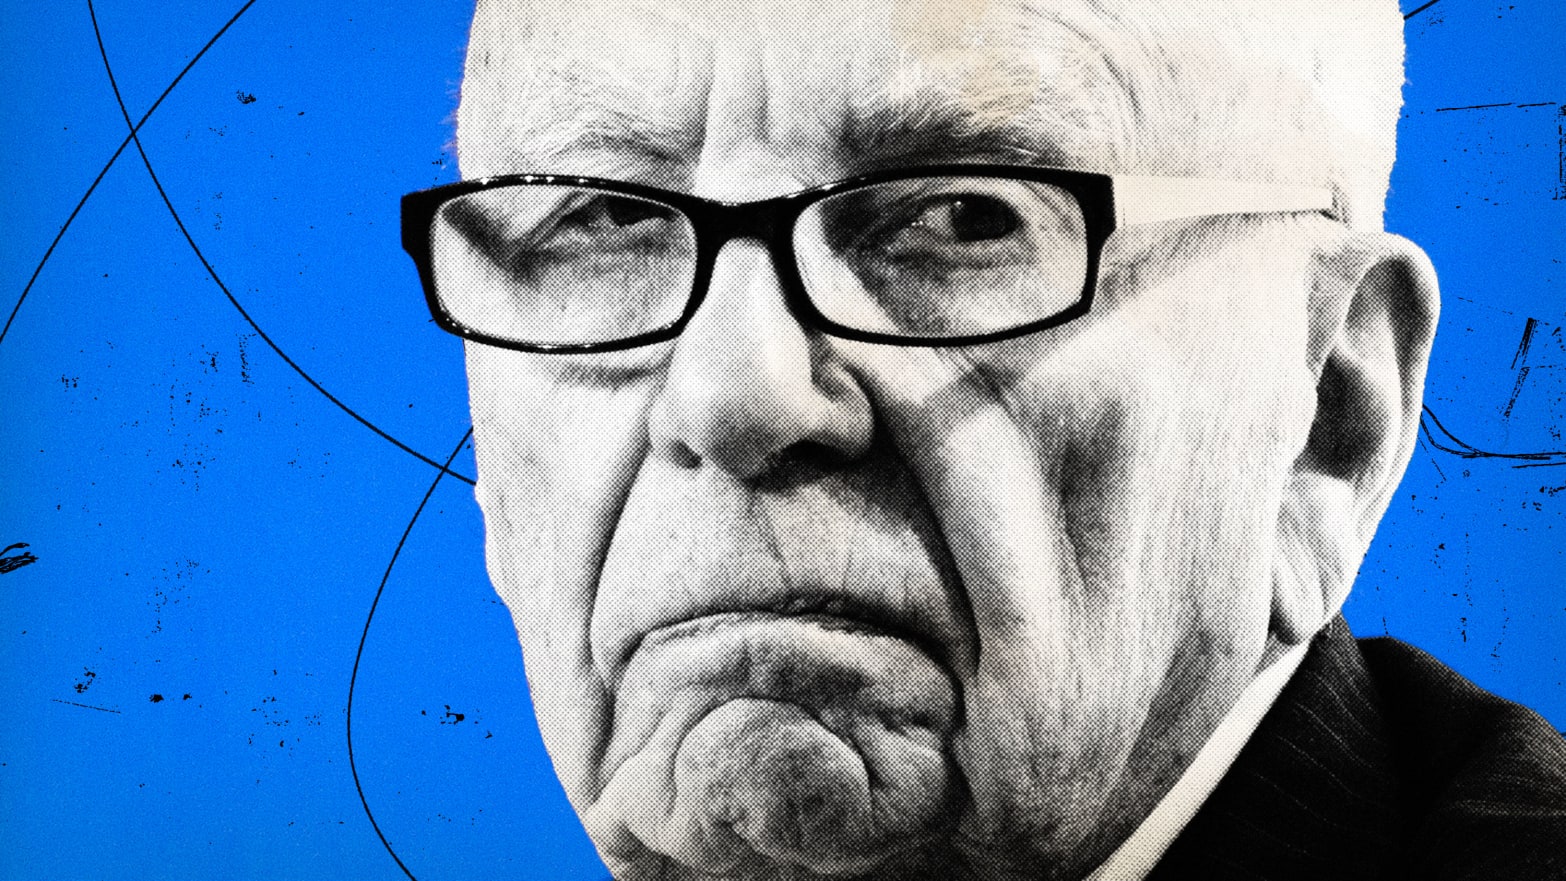 An extreme closeup of Rupert Murdoch in black and white on a blue background